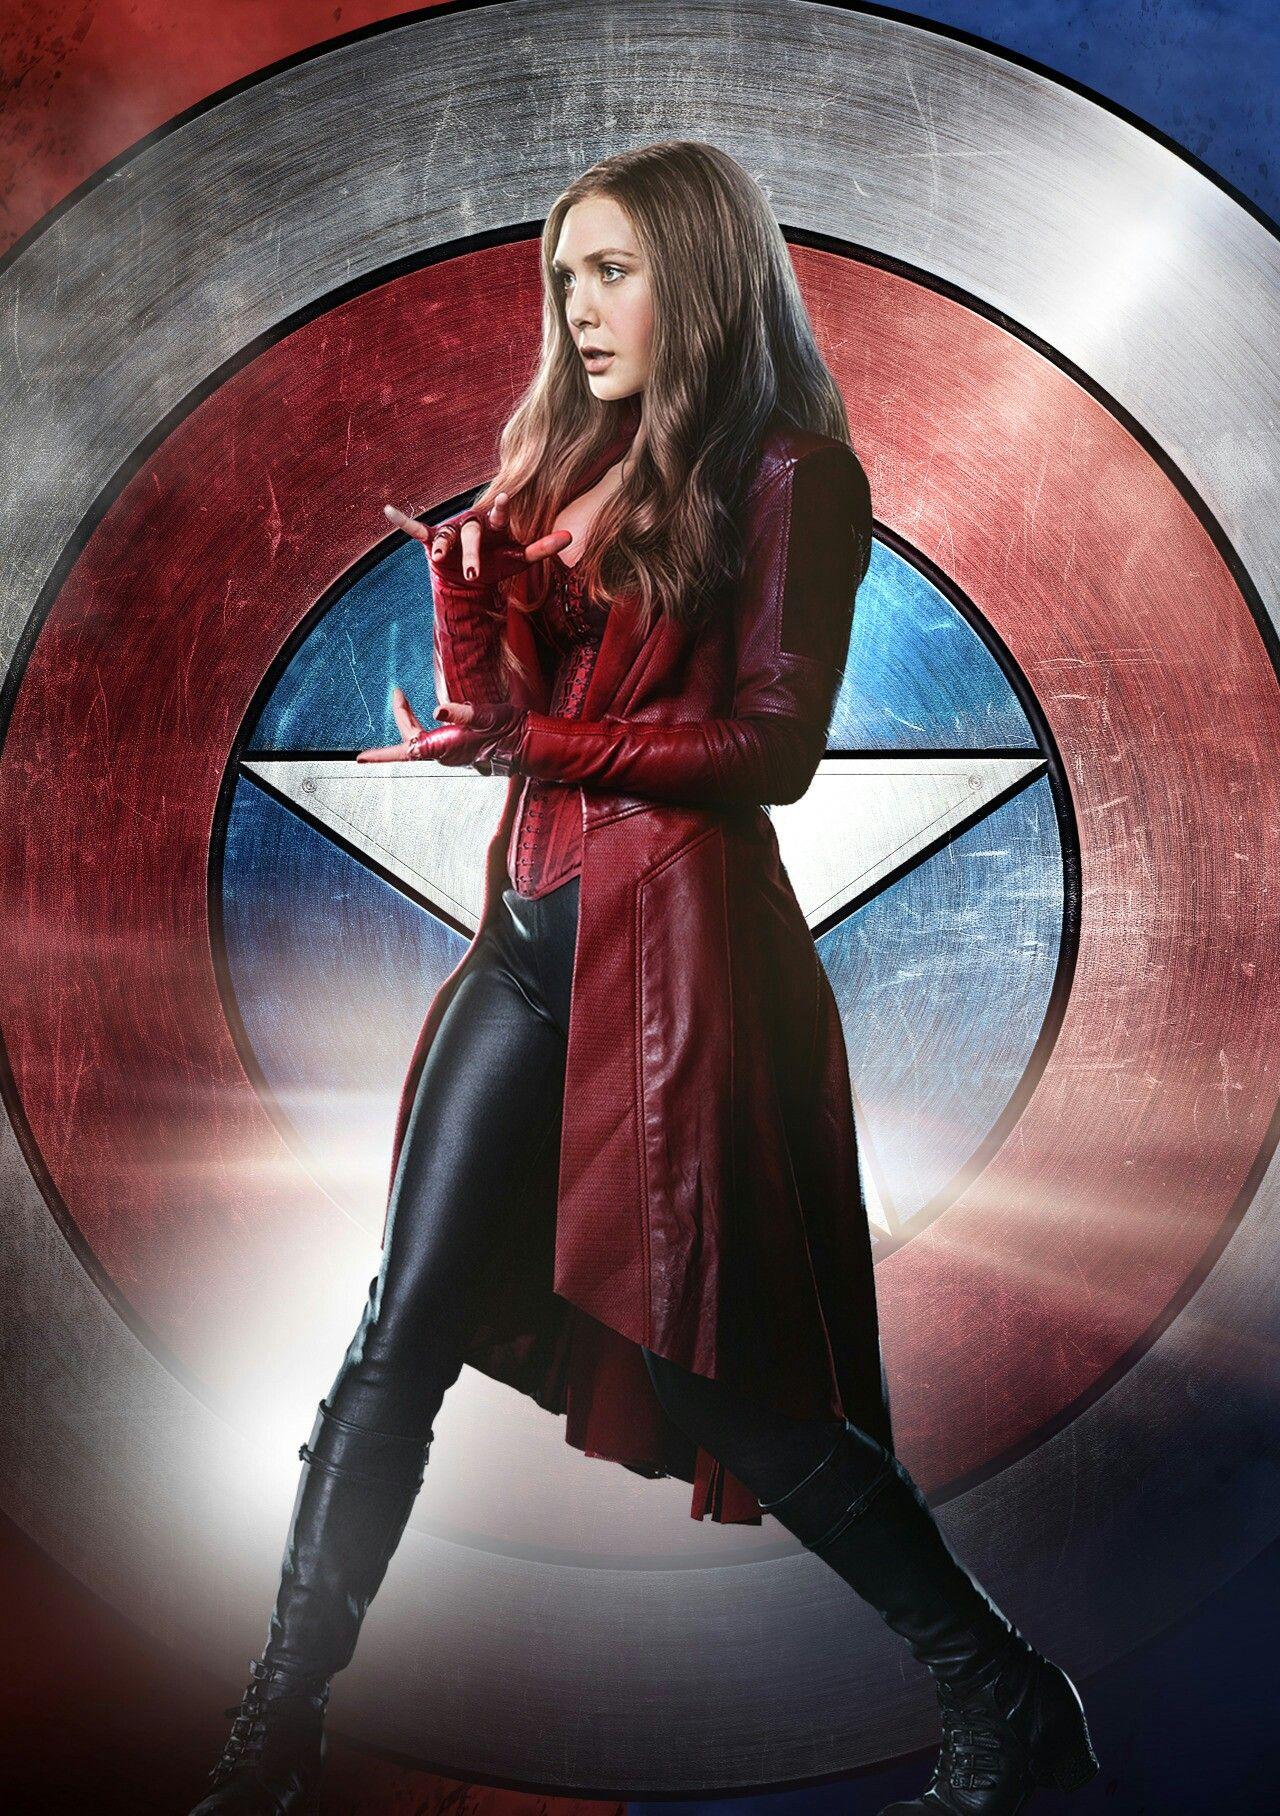 Scarlet Witch thing for Captain America Civil War looks like